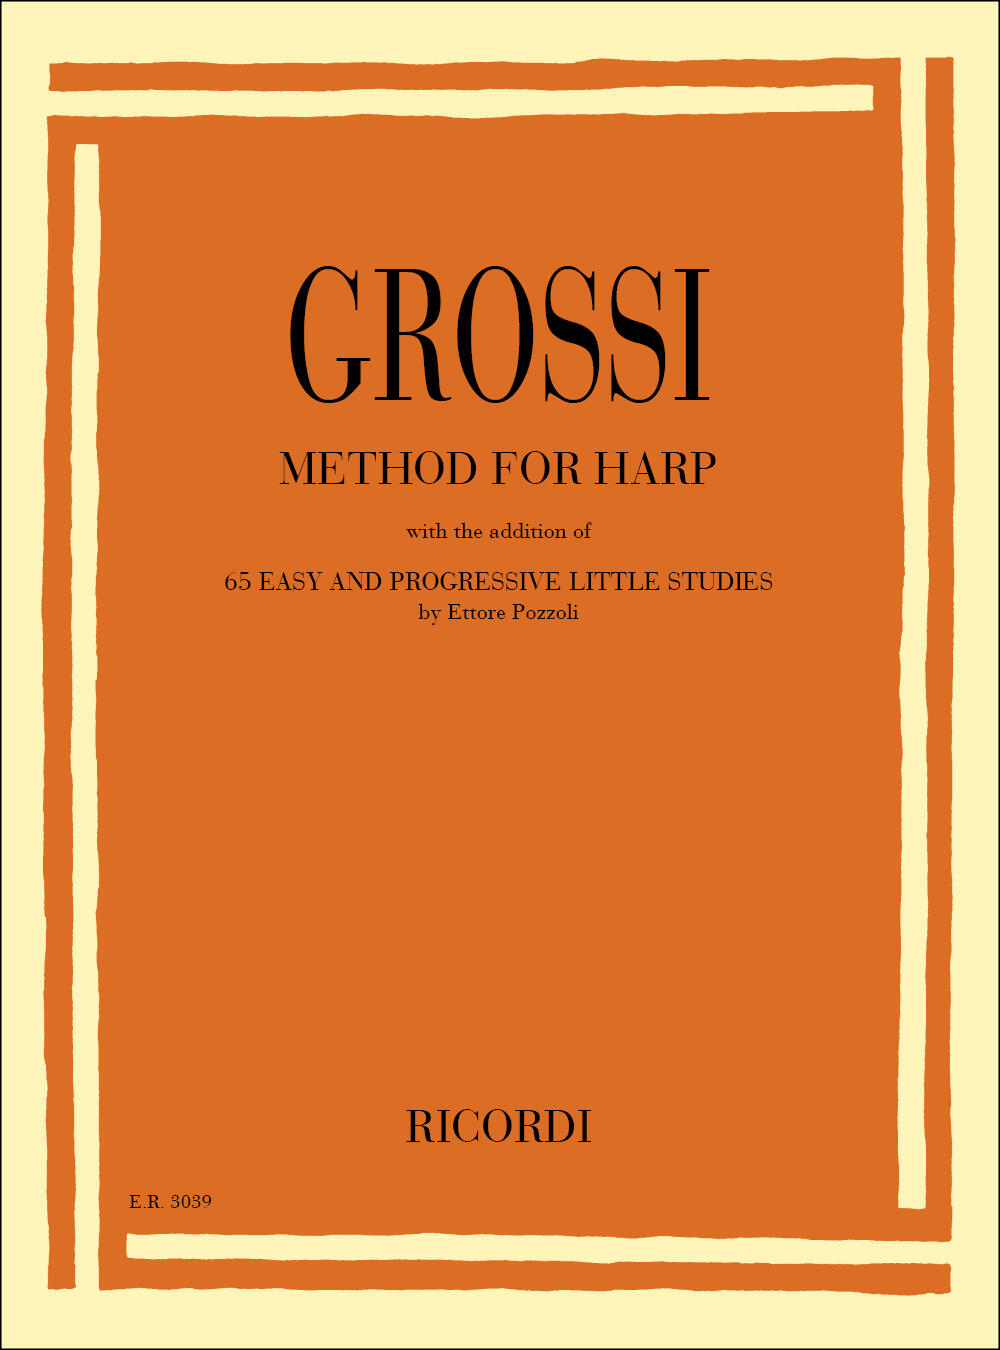 Method for Harp with the addition of 65 easy and progressive little studies by Ettore Pozzoli : photo 1